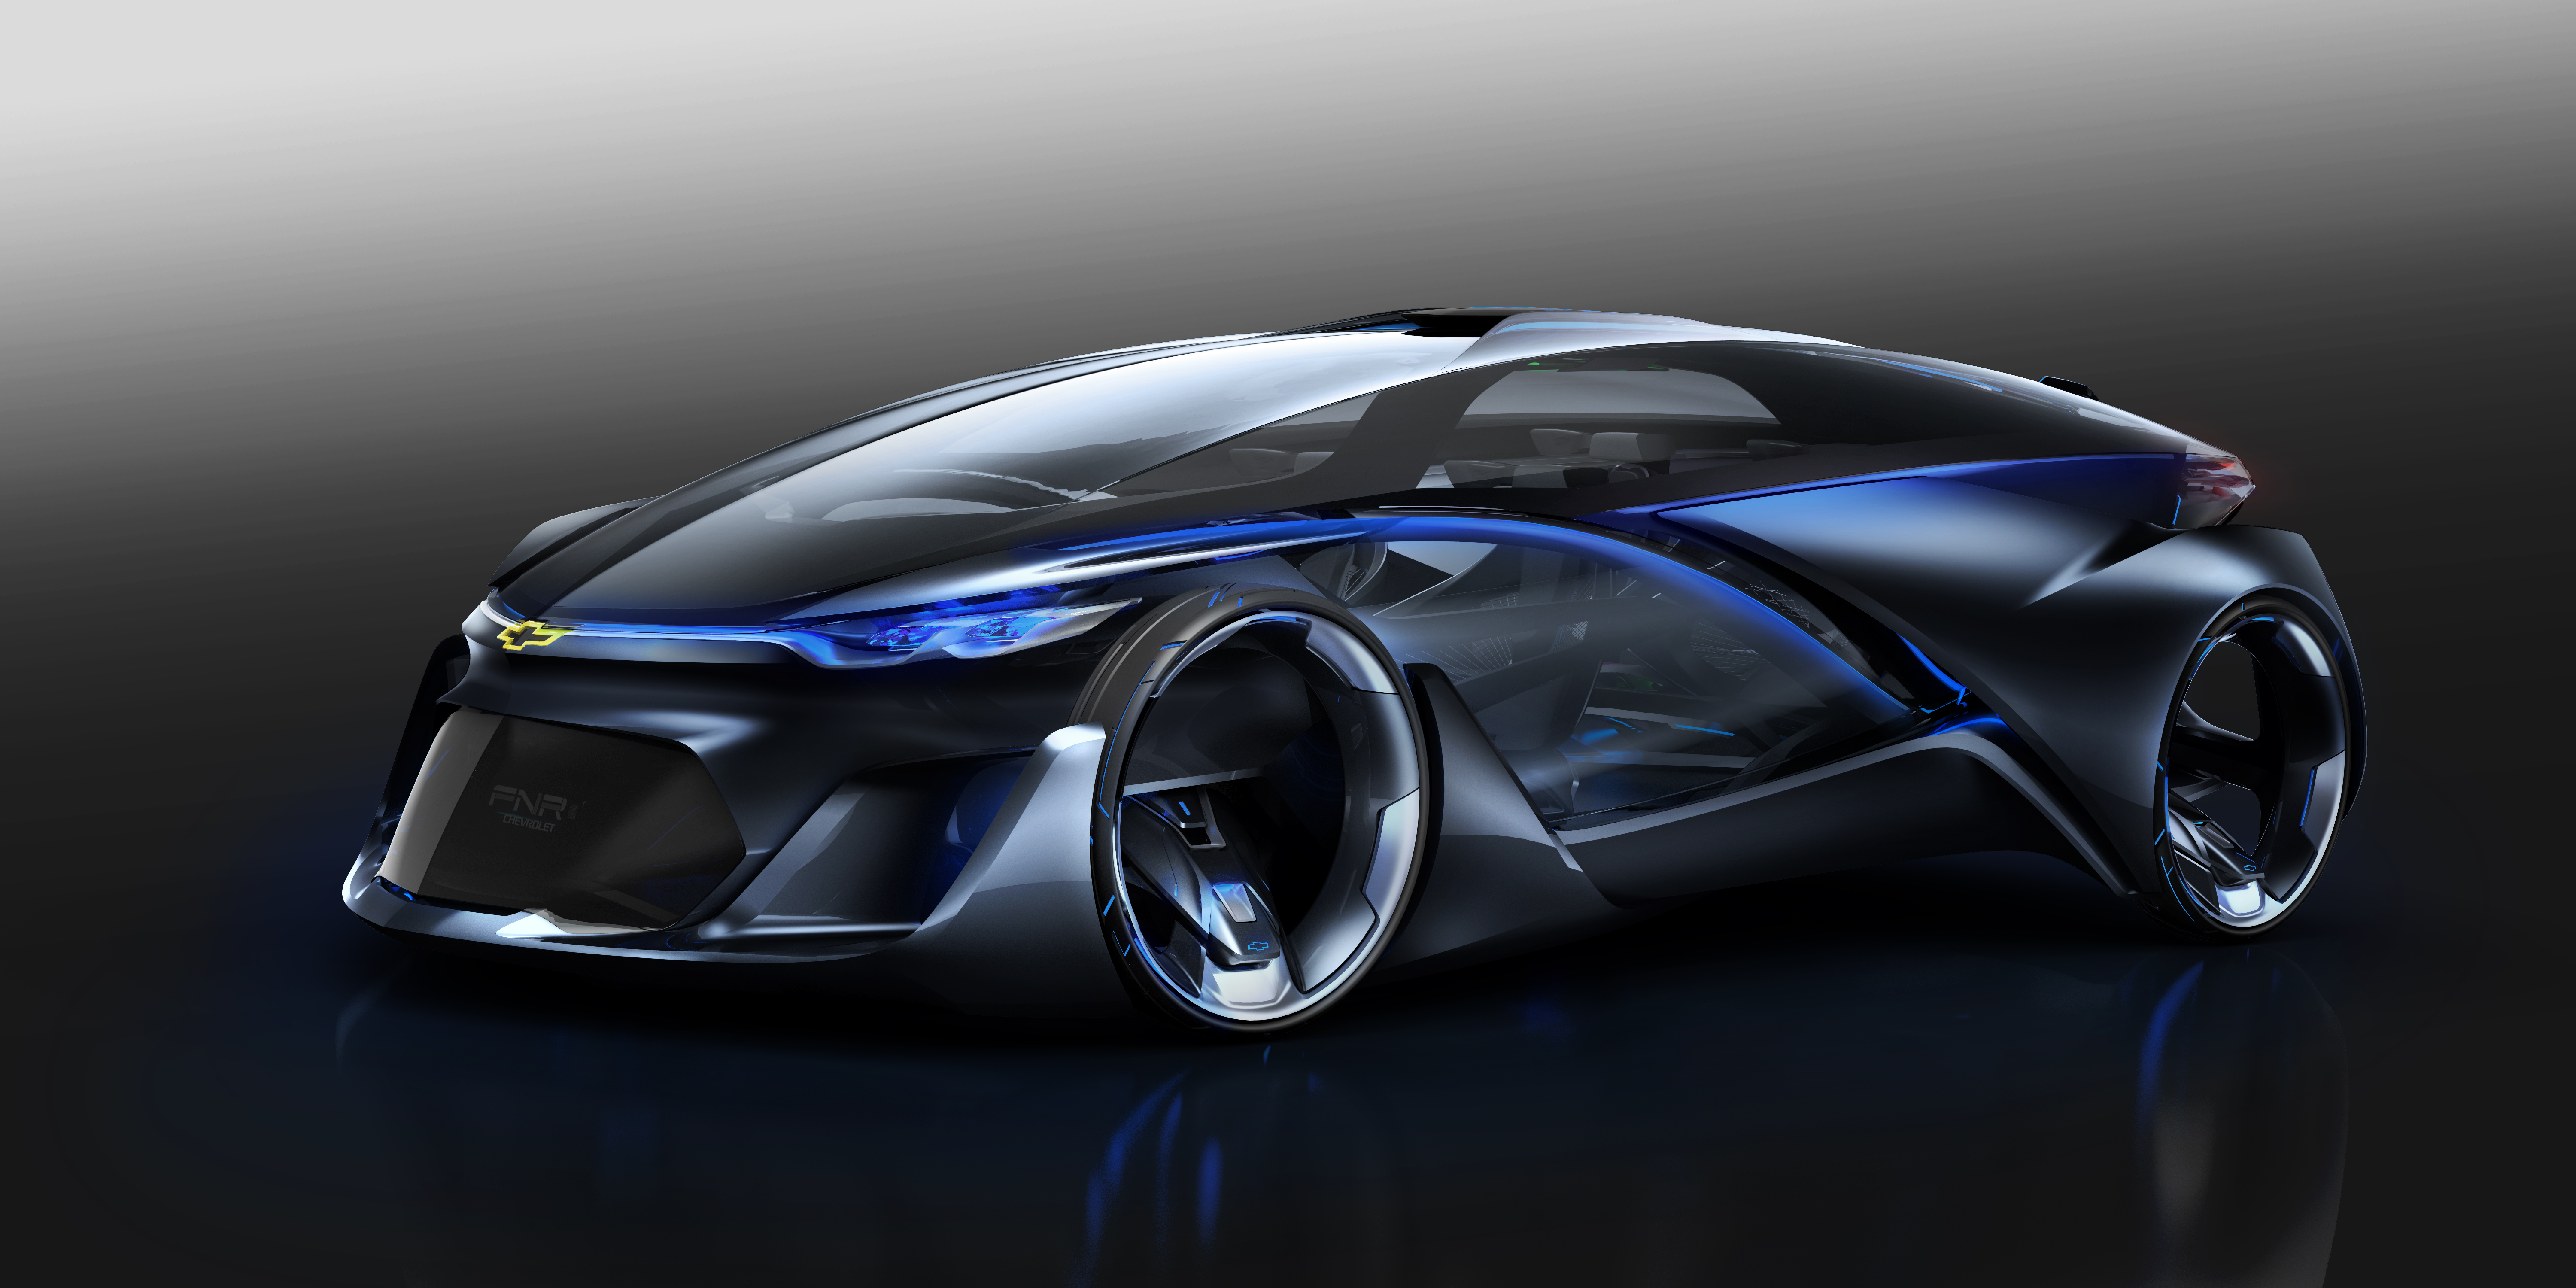 Concept cars